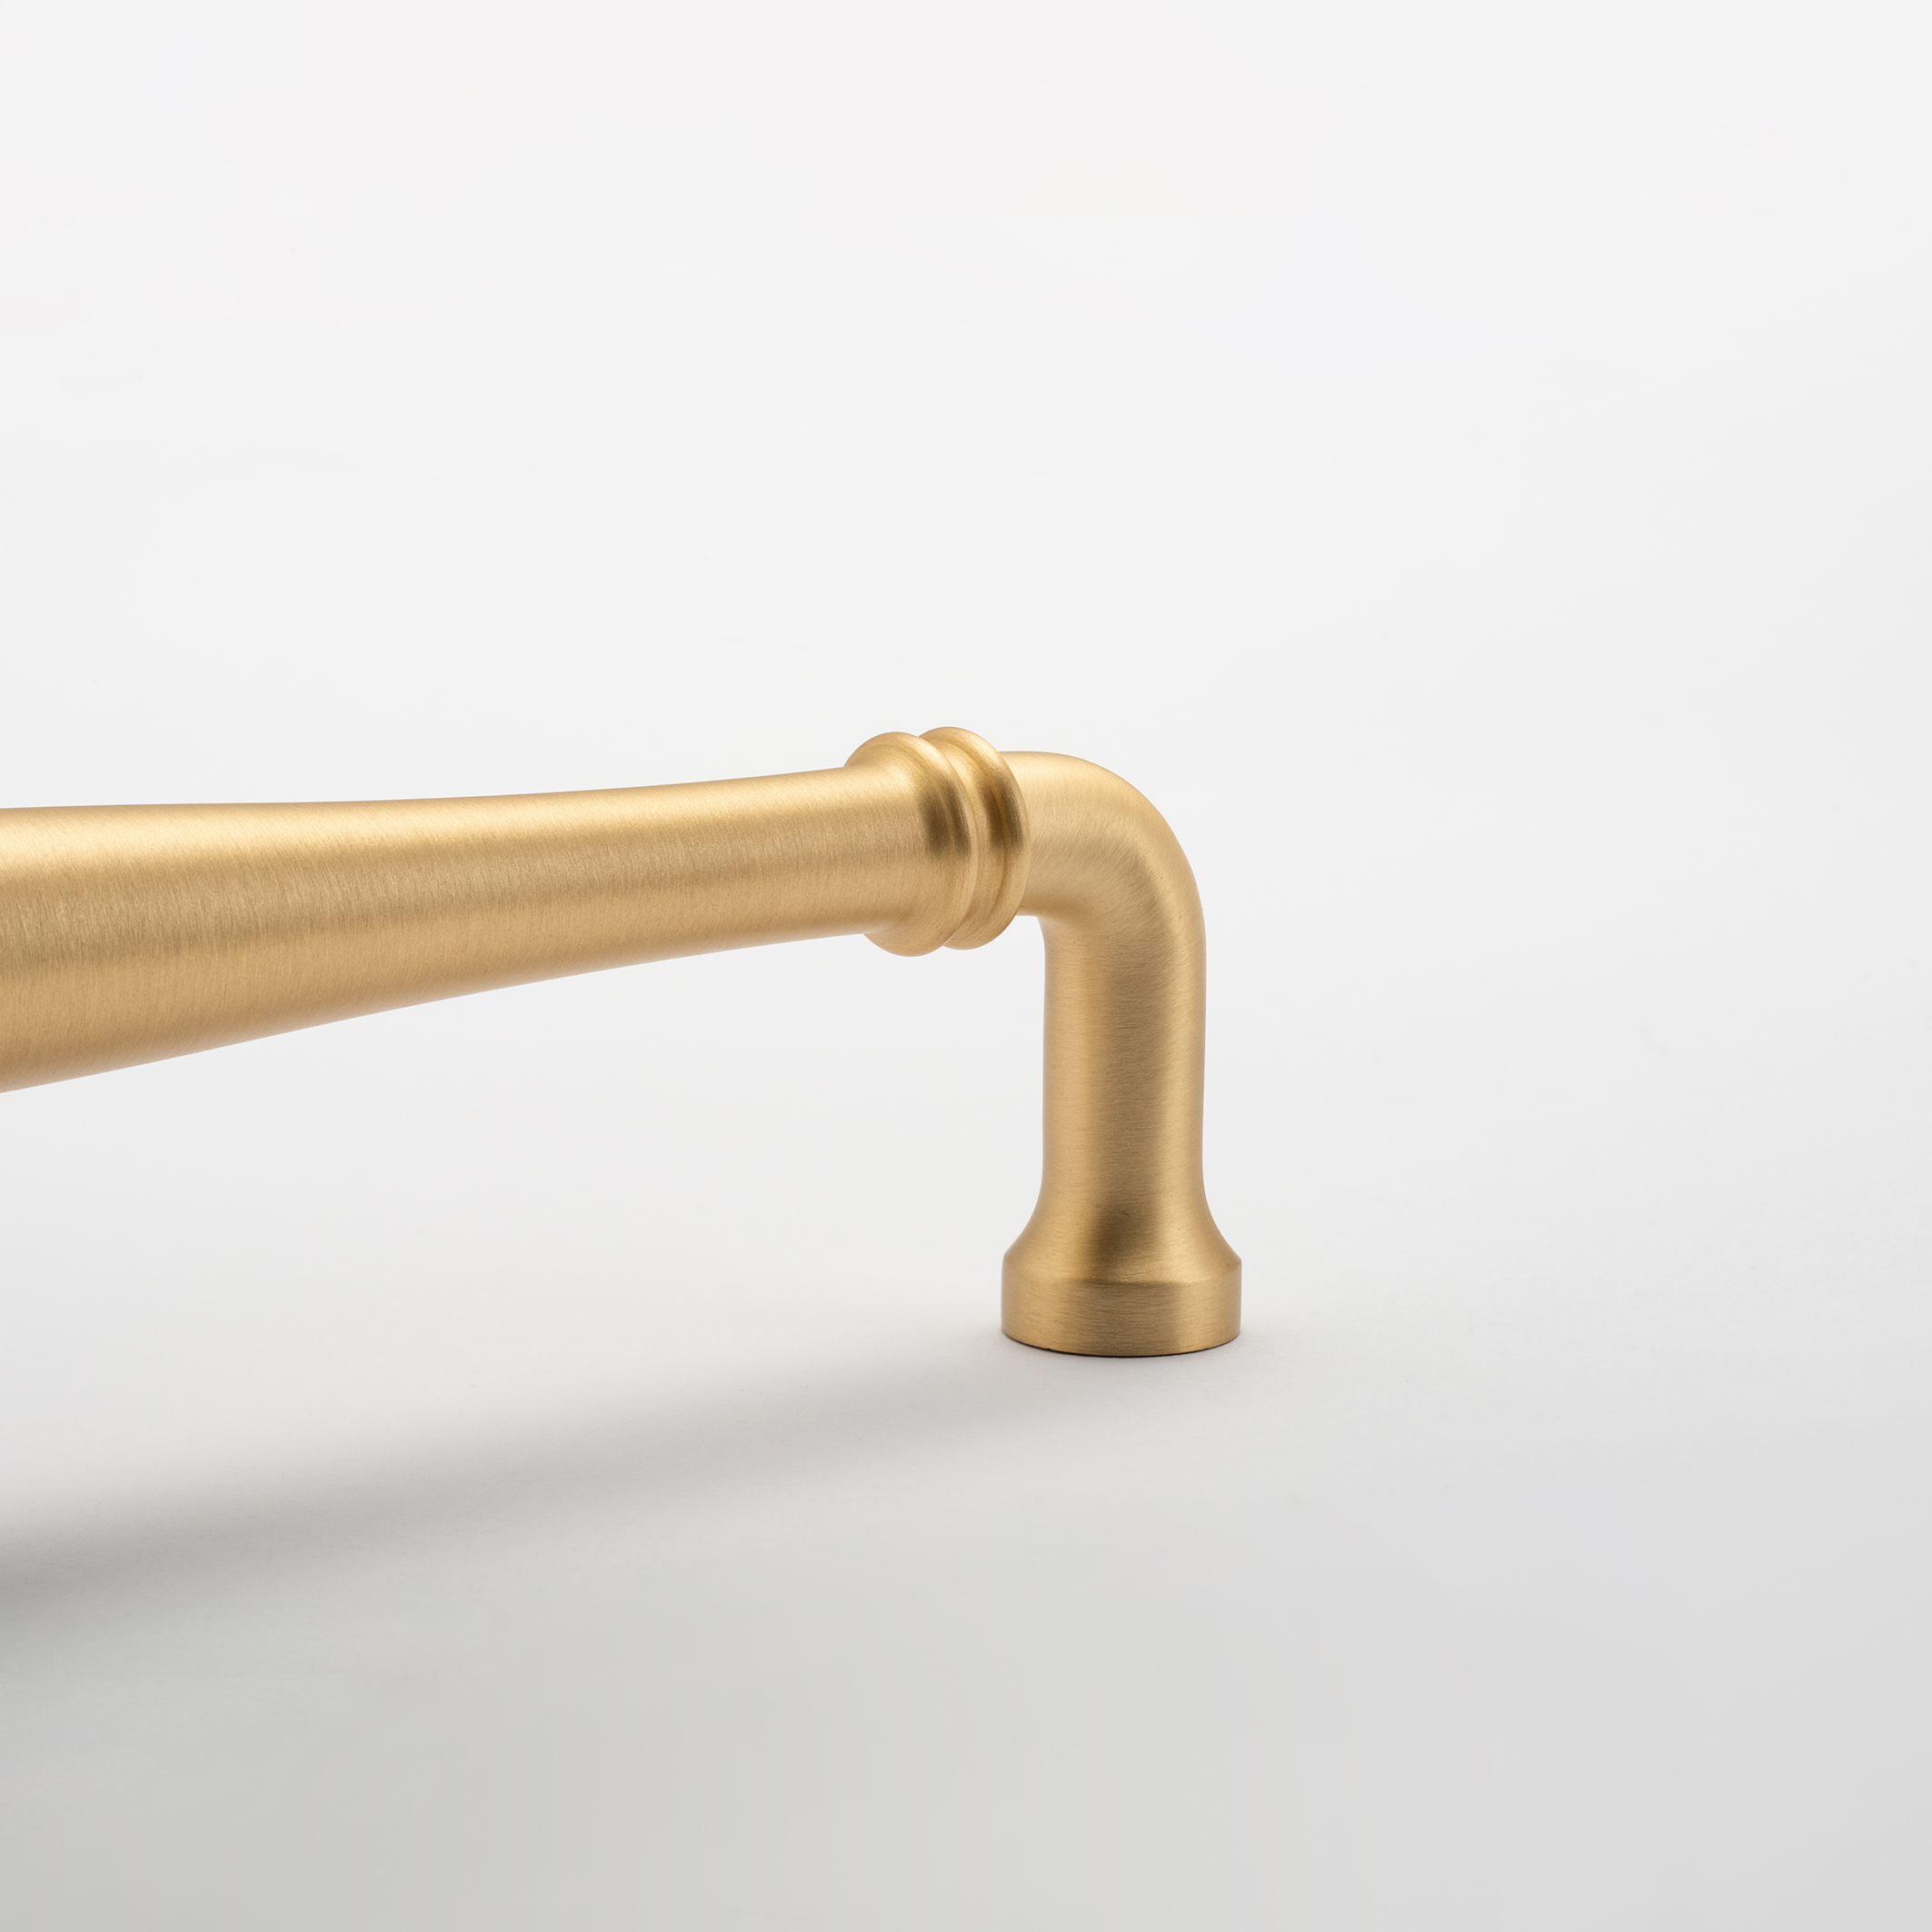 21066 - Sarlat Cabinet Pull - CTC128mm - Brushed Brass